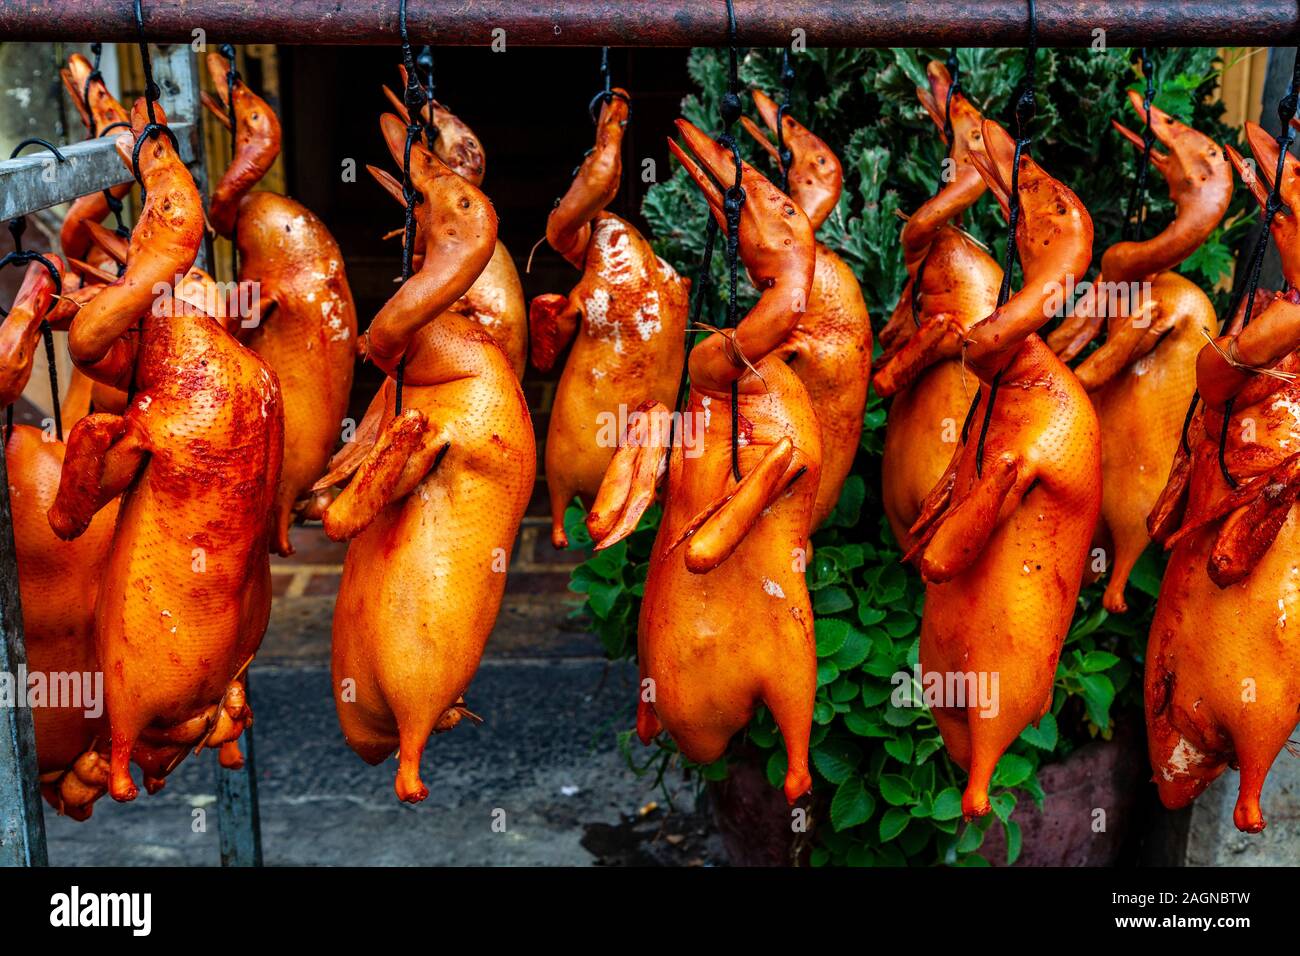 Cooked Ducks Hanging From A Rack In The Street, Phnom Penh, Cambodia. Stock Photo